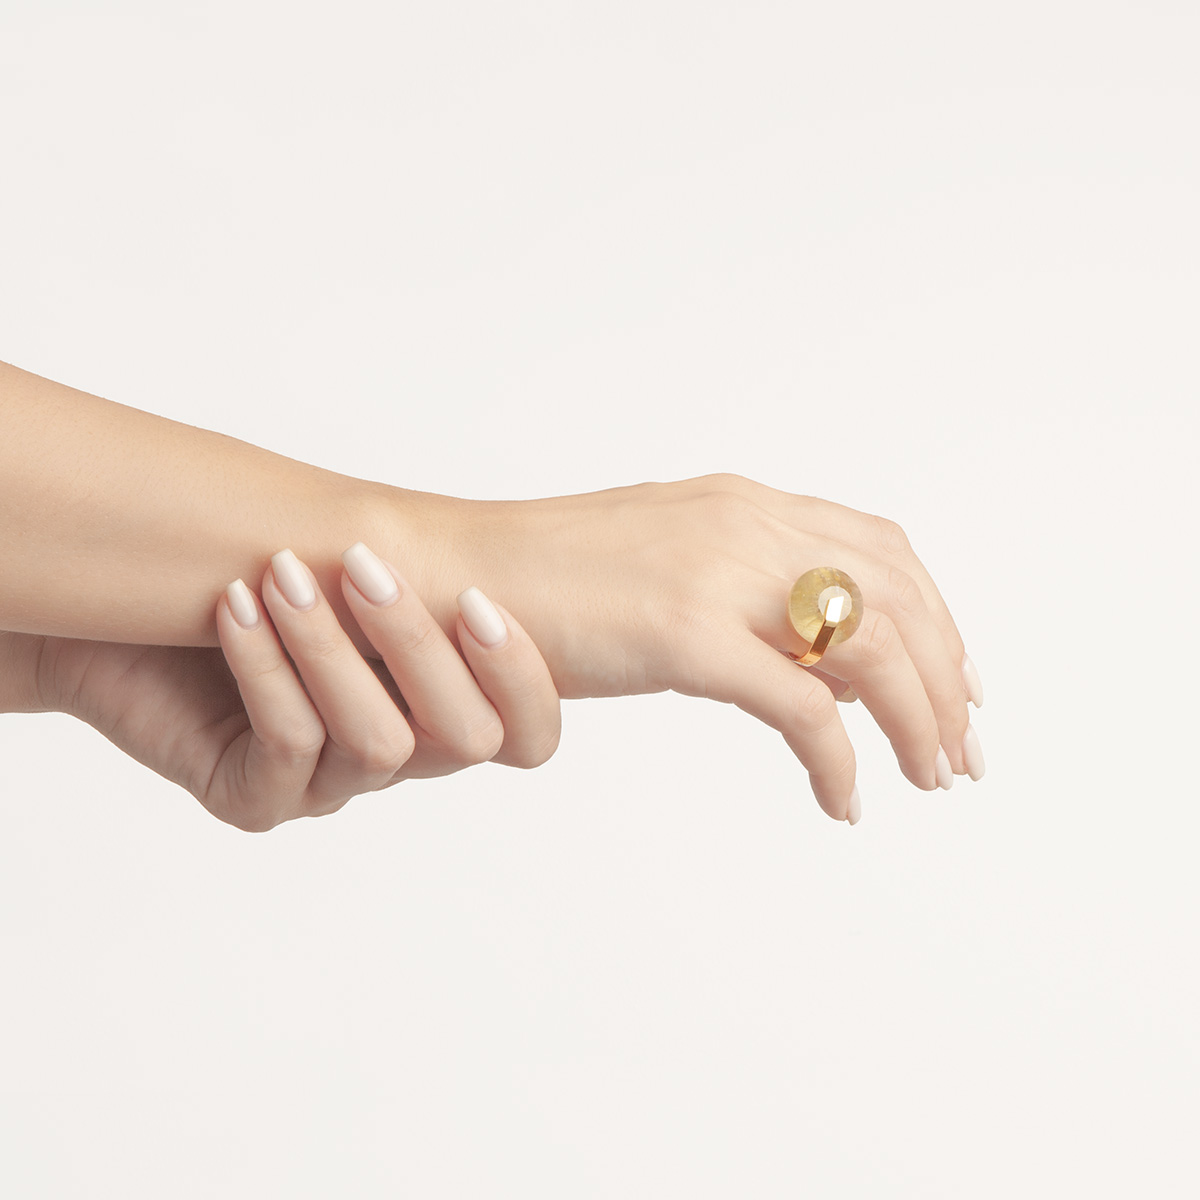 Handmade Gau ring in 18k gold plated 925 silver and rutilated quartz on hands designed by Belen Bajo